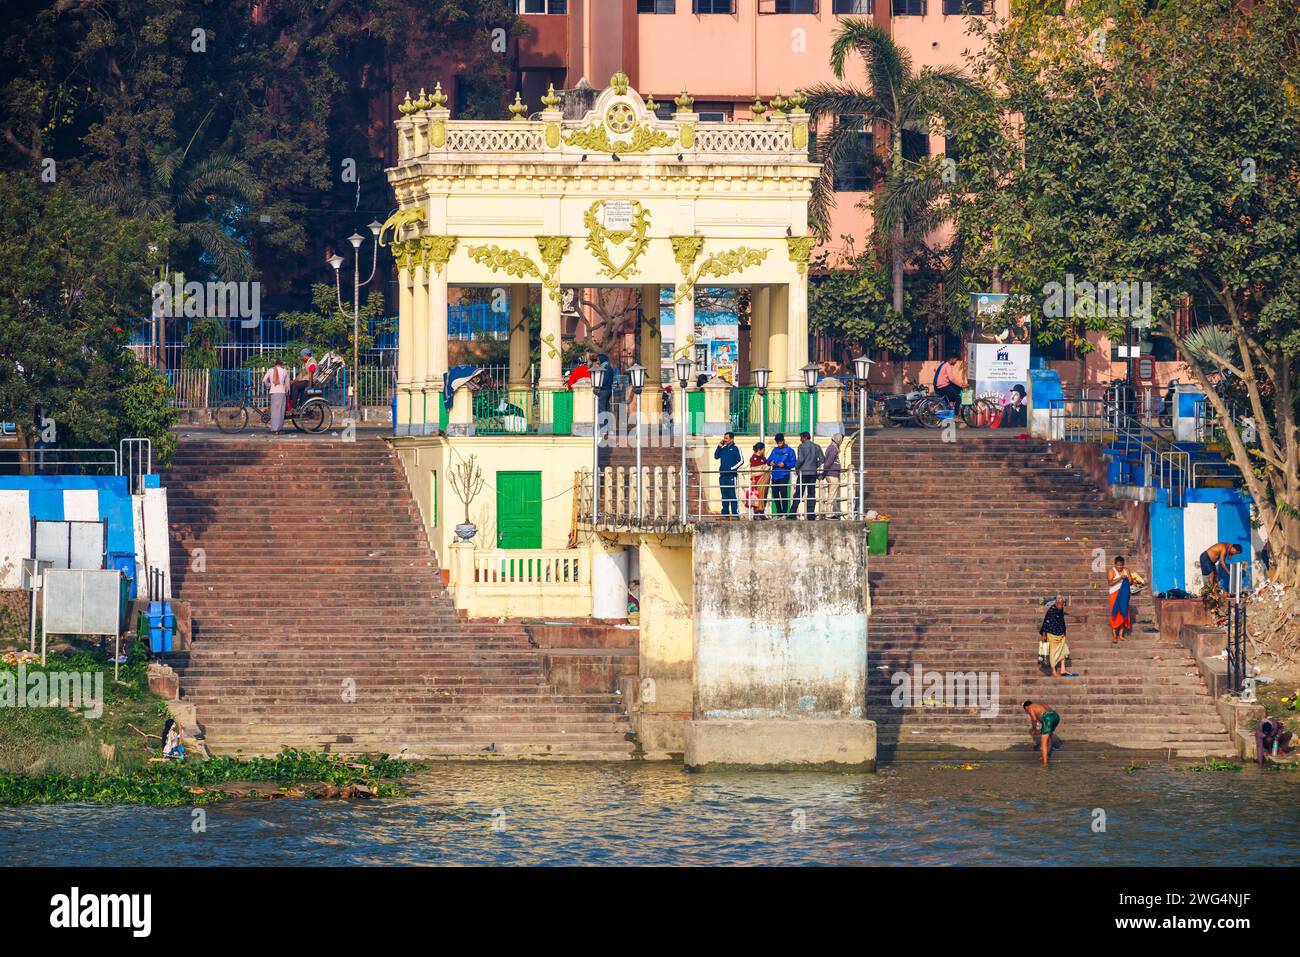 Typical riverside ghat and steps on the banks of the Hooghly River at dusk in Chandannagar (Chandernagore), North Barrackpore, West Bengal, India Stock Photo